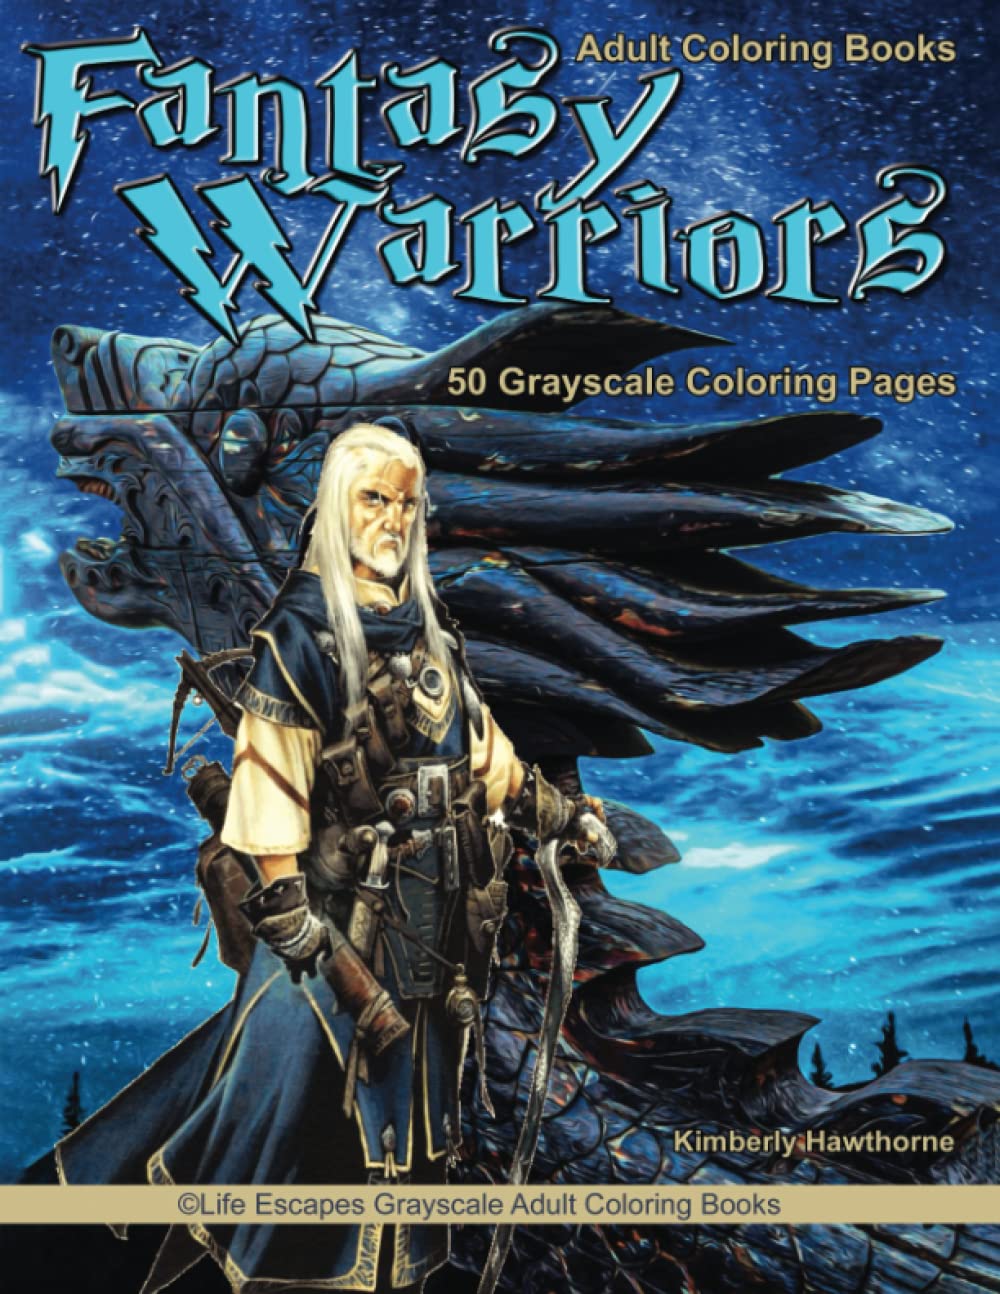 Adult coloring books fantasy warriors life escapes grayscale adult coloring books grayscale coloring pages by kimberly hawthorne